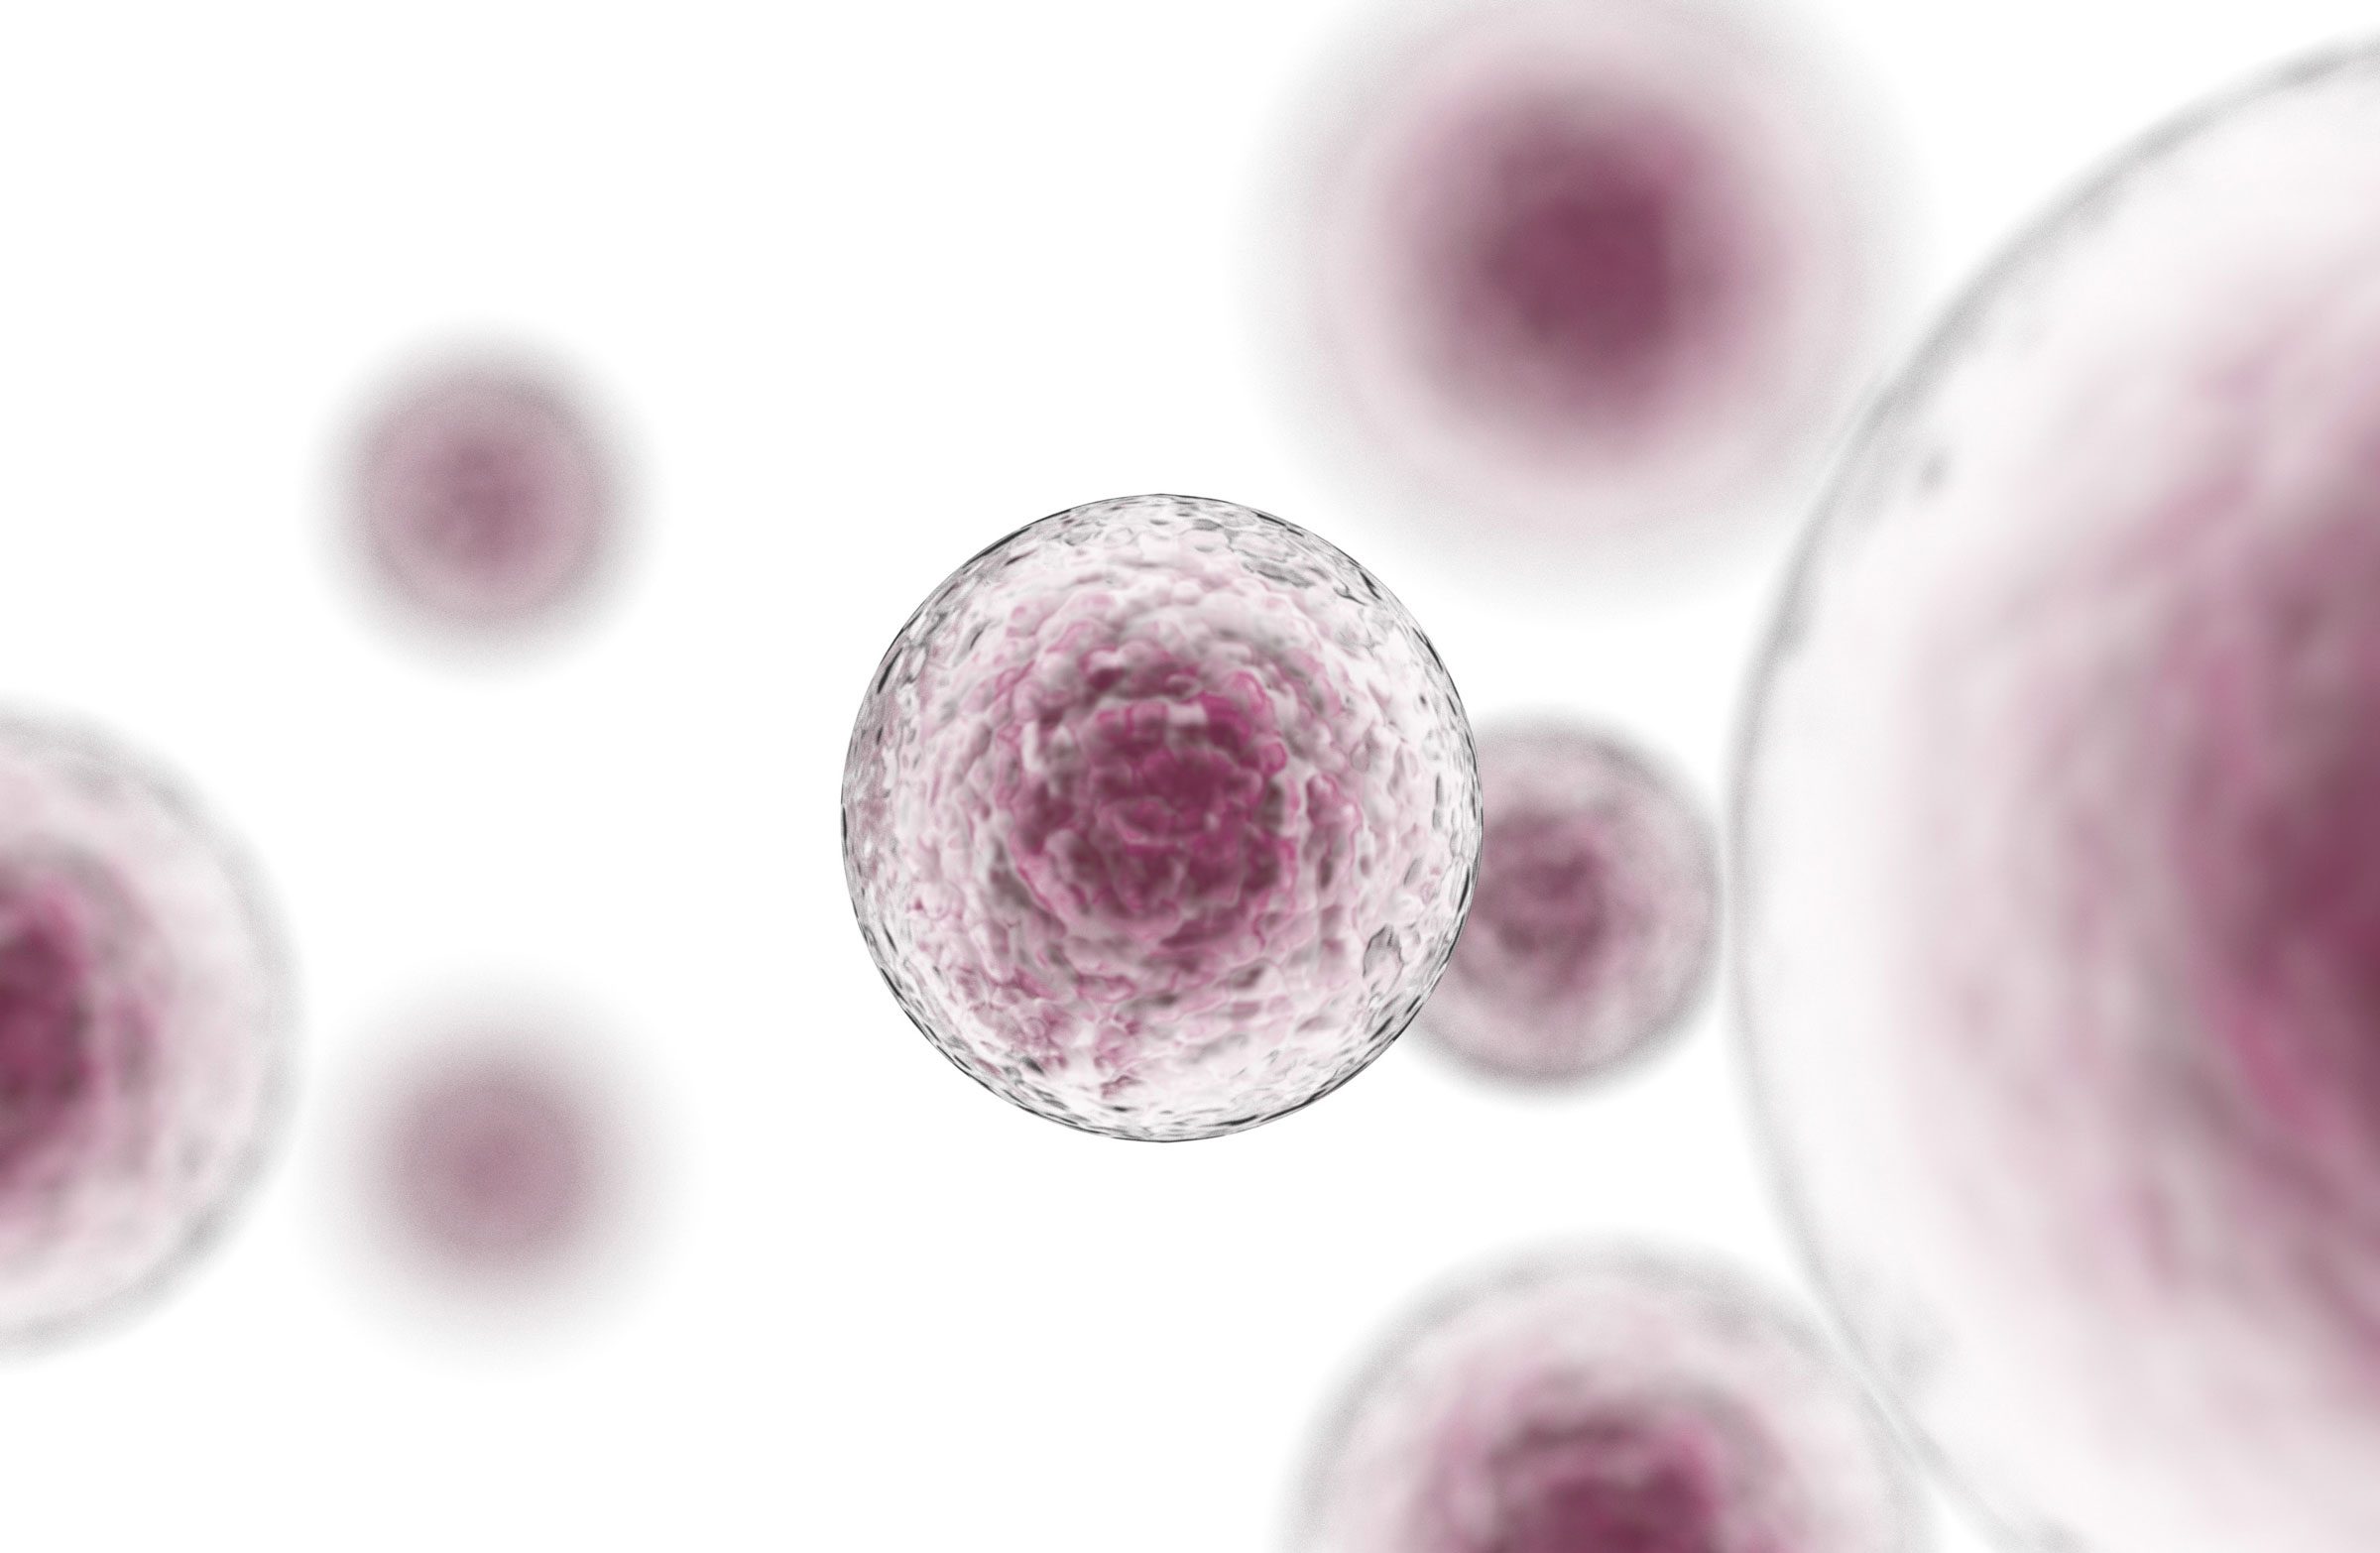 Multiple stem cells look like bumpy, transparent spheres with darker centres.